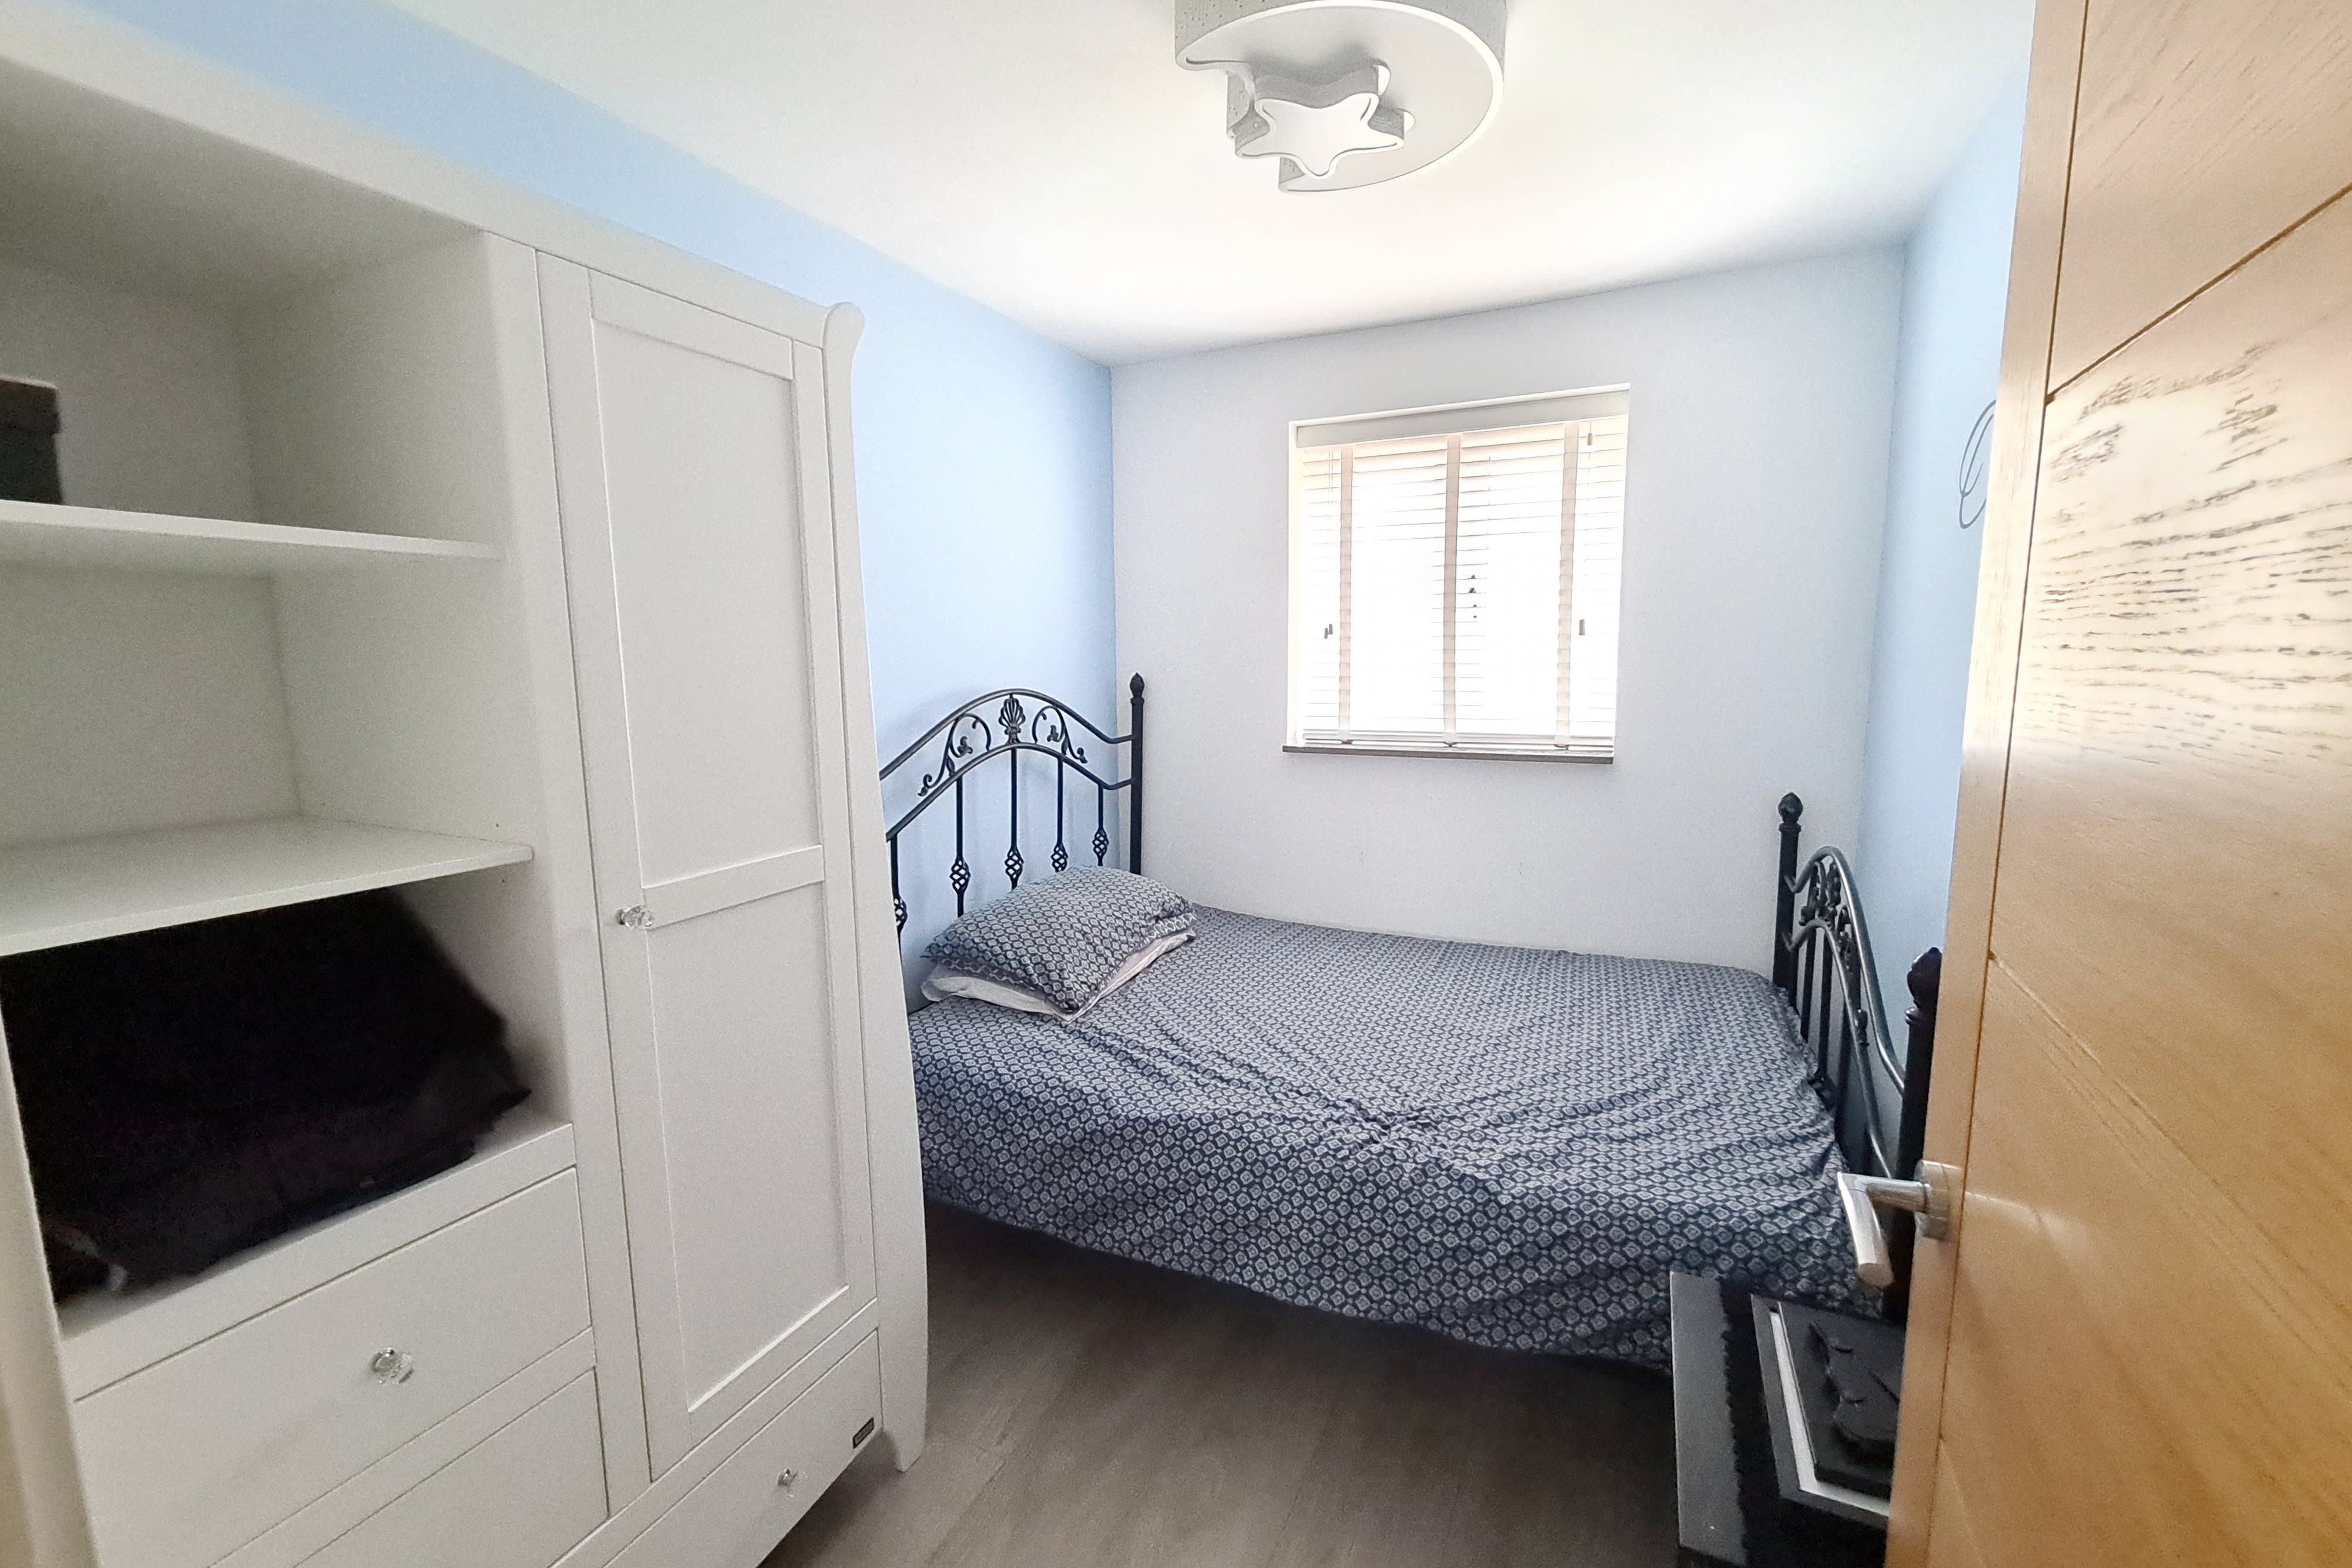 1 bed house / flat share to rent in The Chase (Bedroom 3), Rayleigh, SS6 